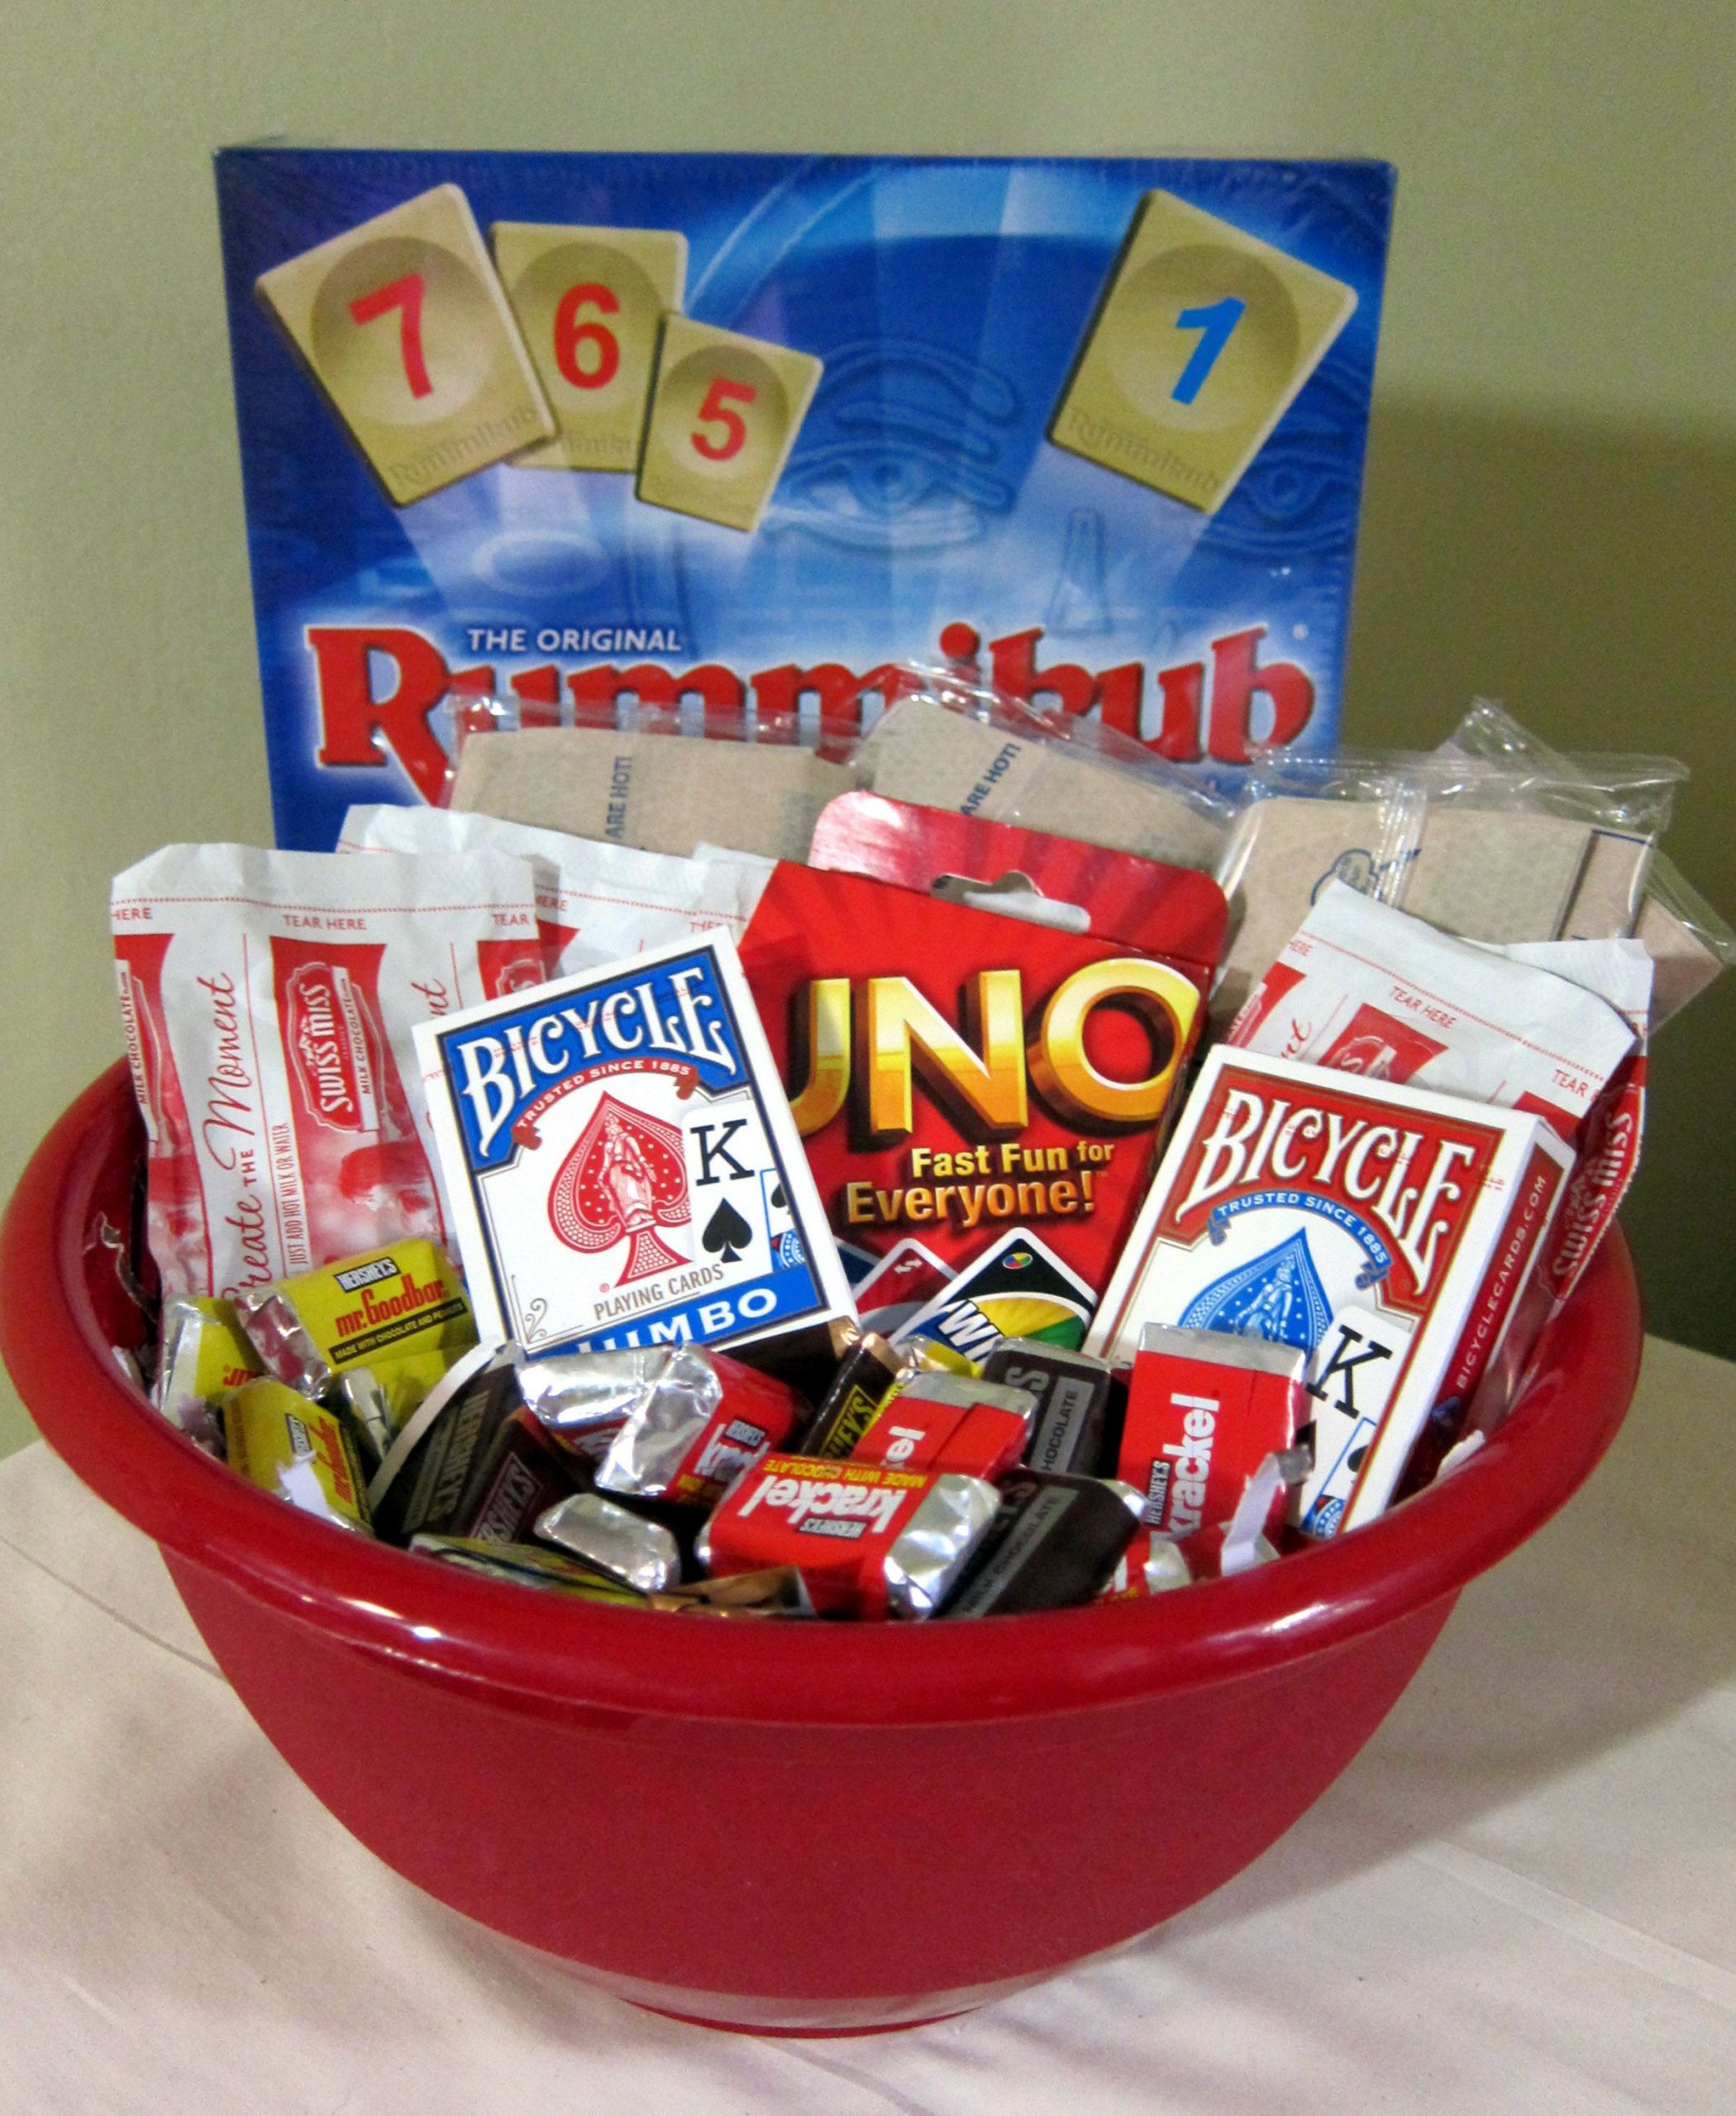 Game Night Gift Basket Ideas
 Pin by Craft Classes line = line Workshops on Gift